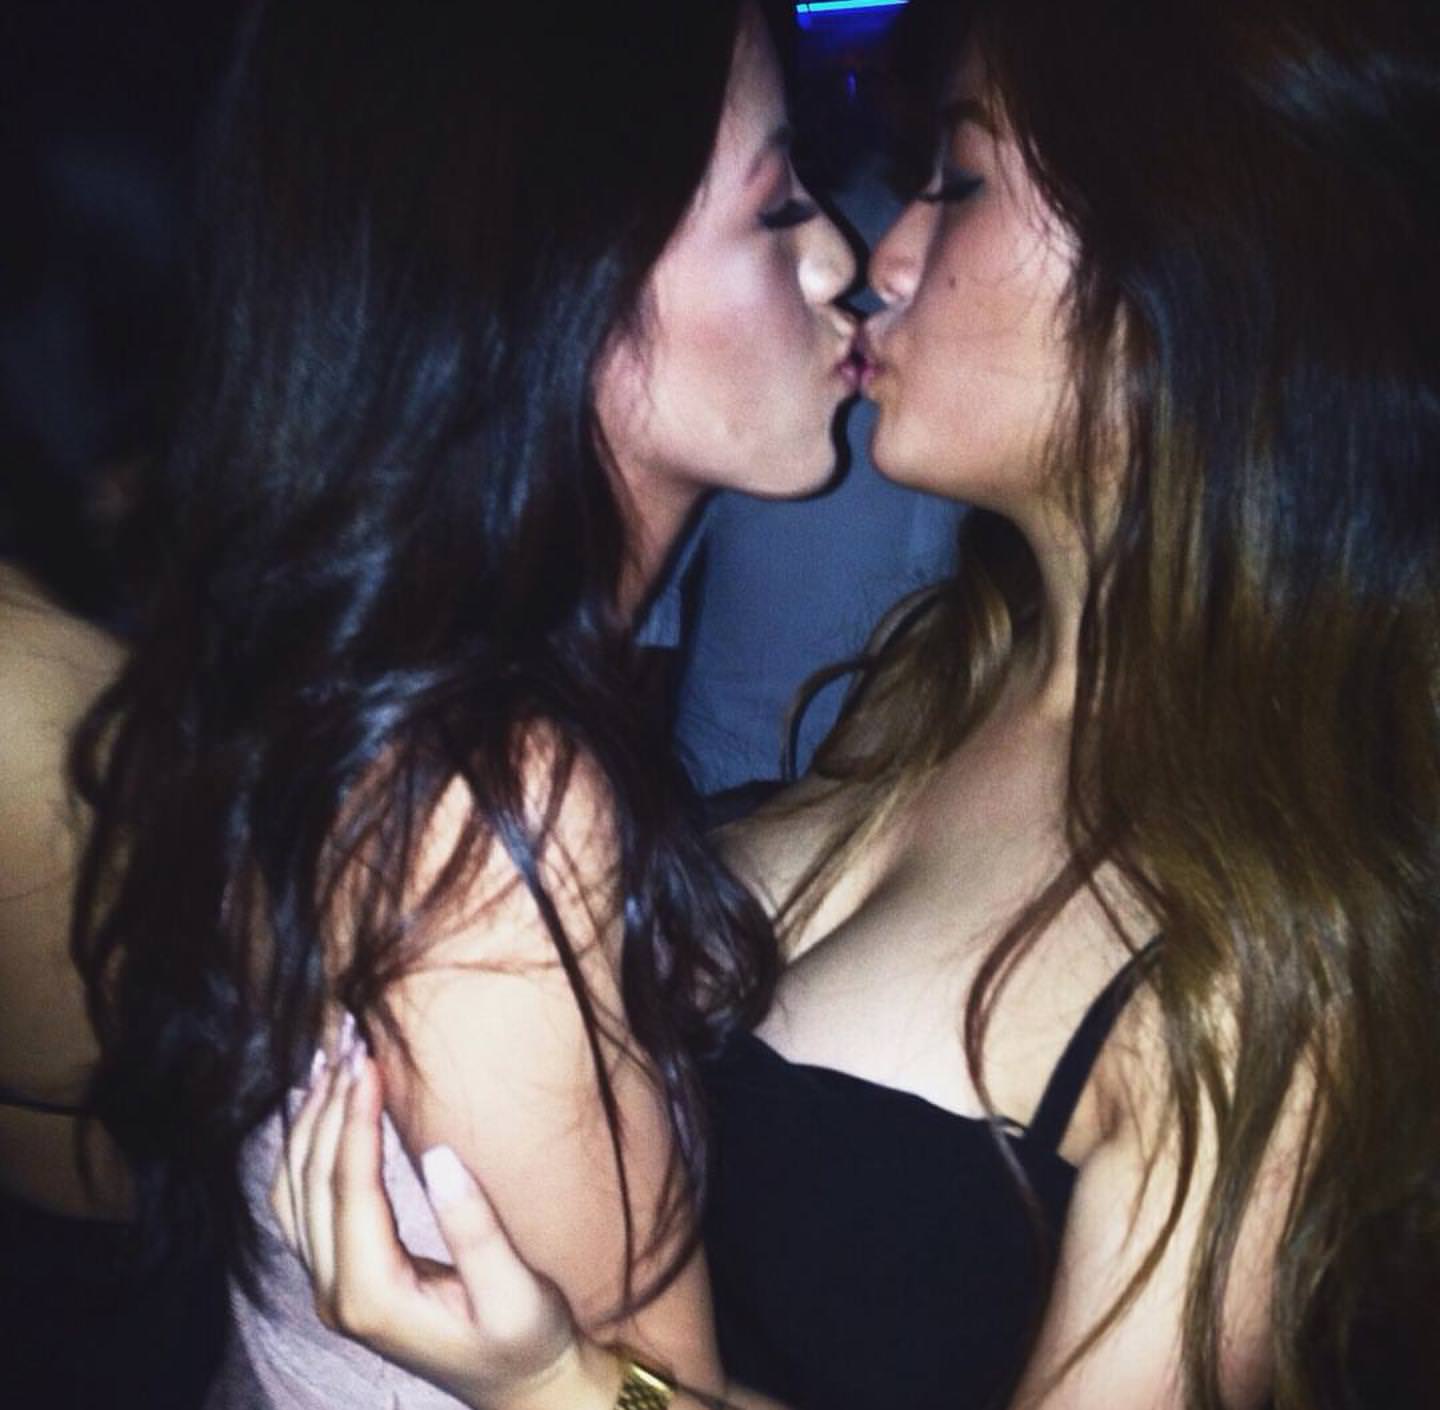 best of Club making out